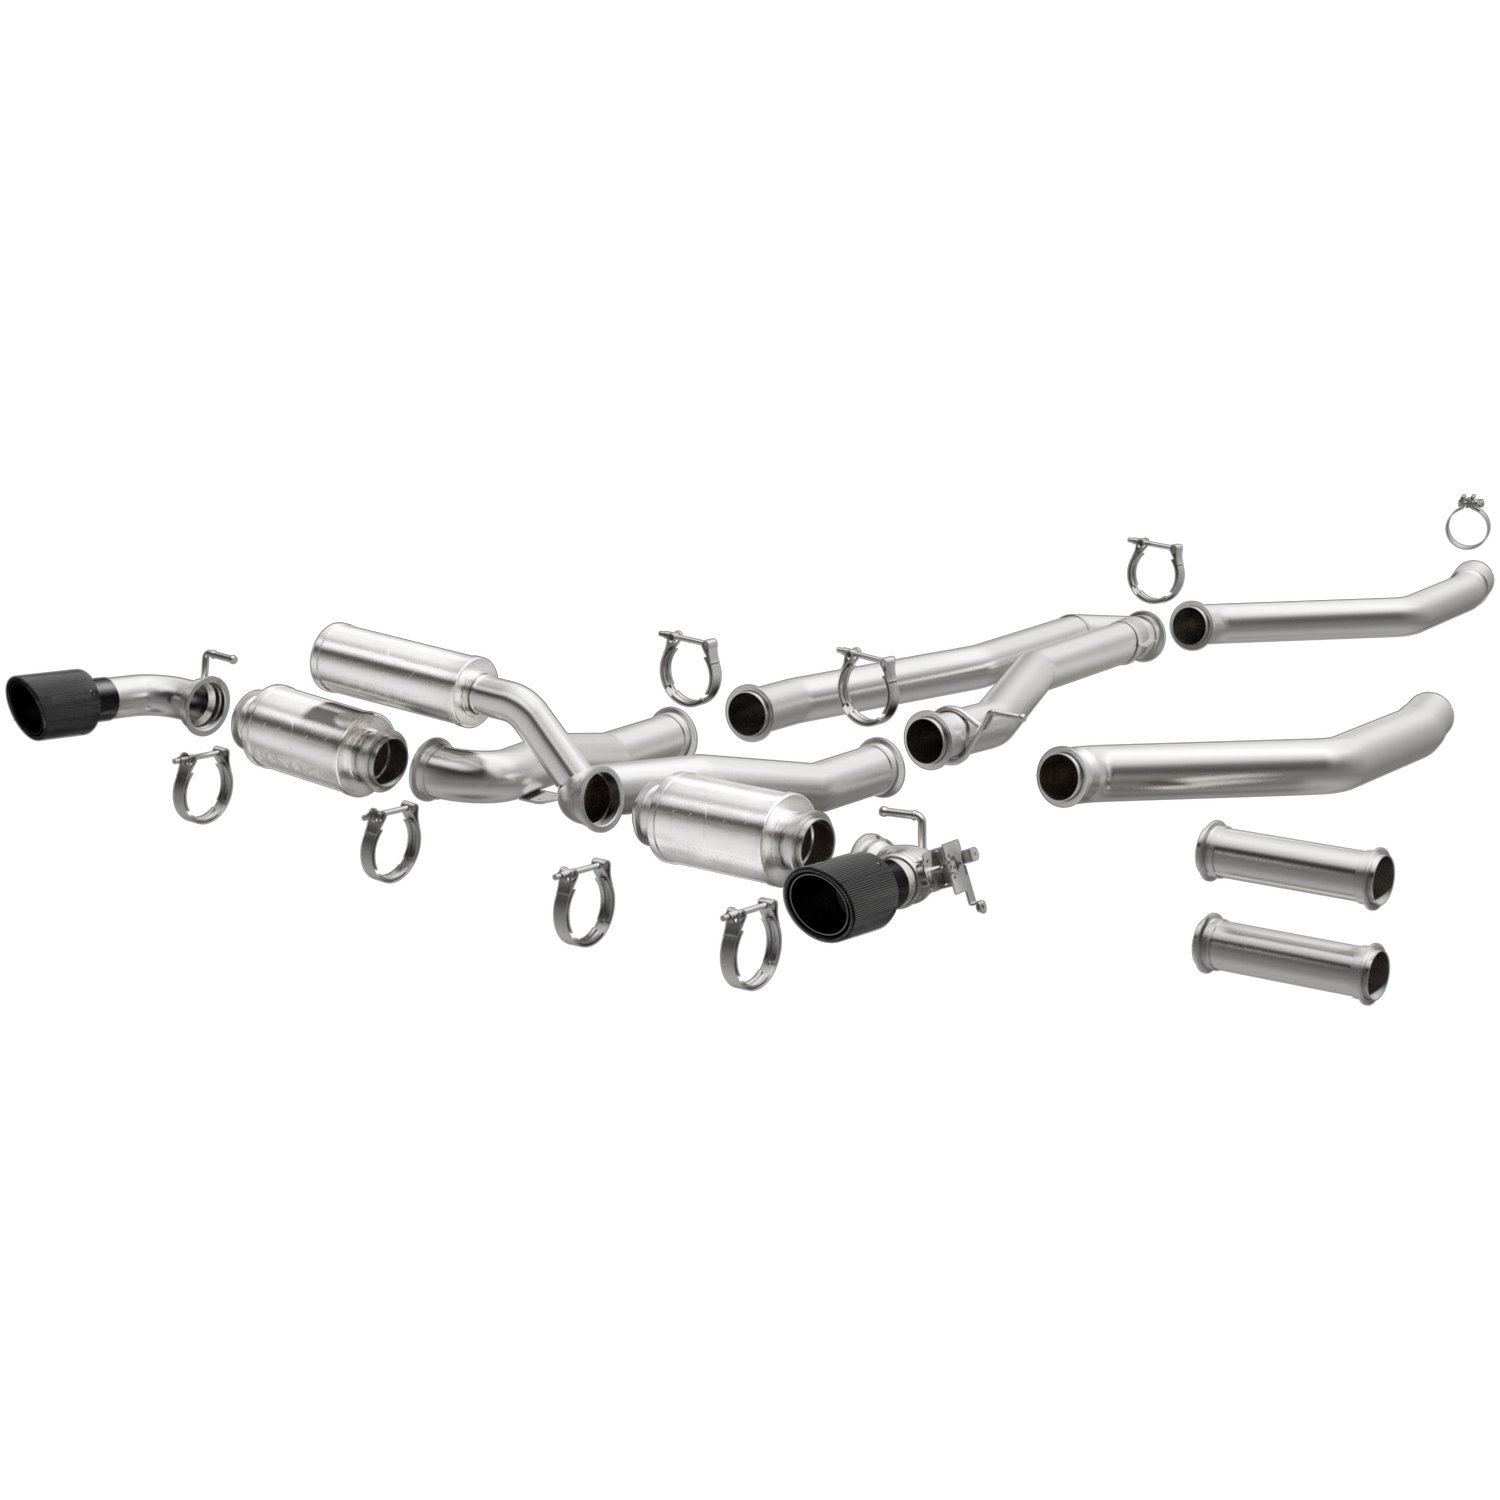 xMOD Series Cat-Back Exhaust System Fits Select Late-Model Toyota Supra GR